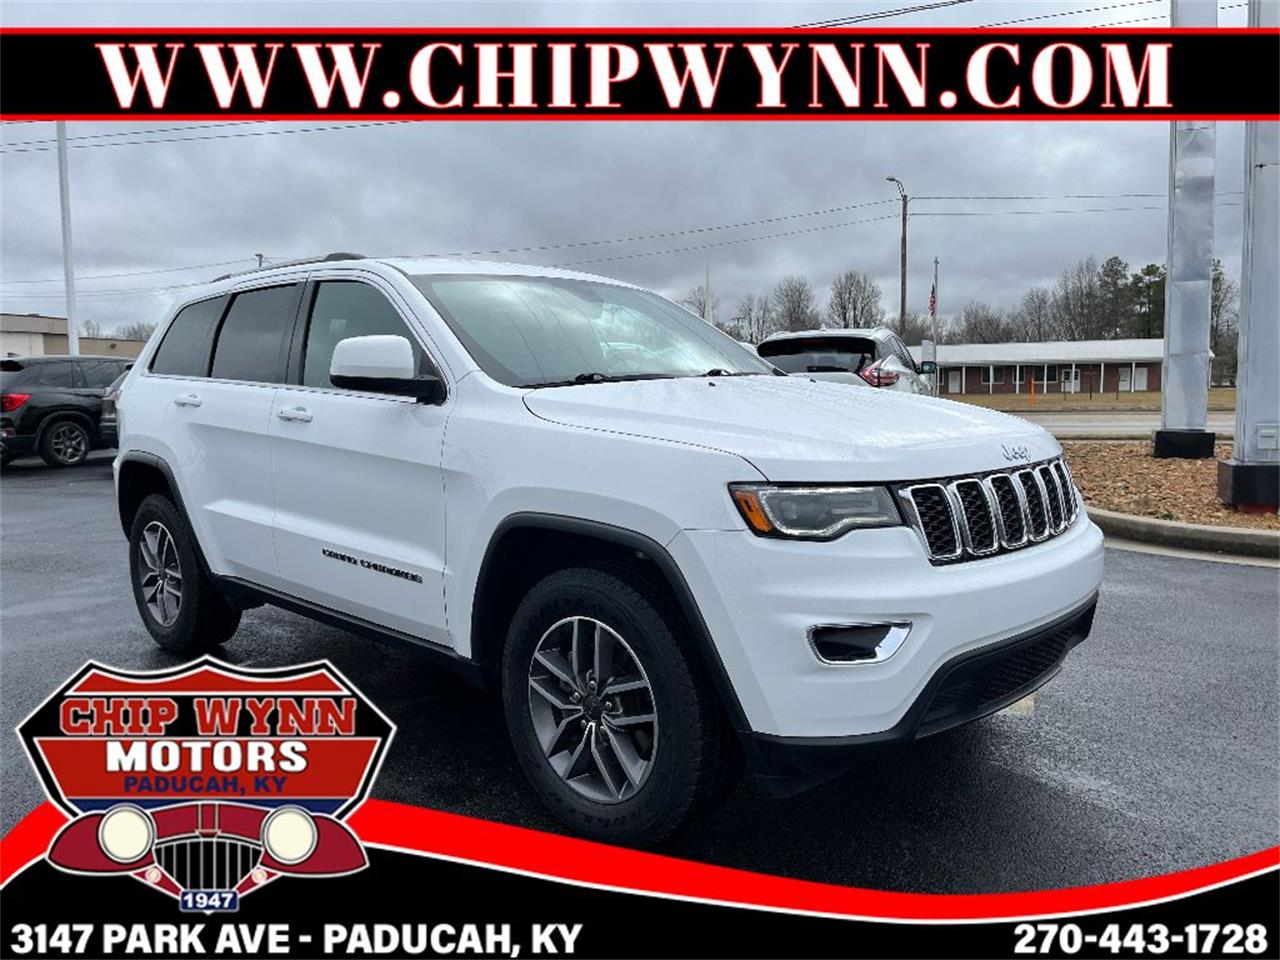 For Sale: 2020 Jeep Grand Cherokee in Paducah, Kentucky for sale in Paducah, KY